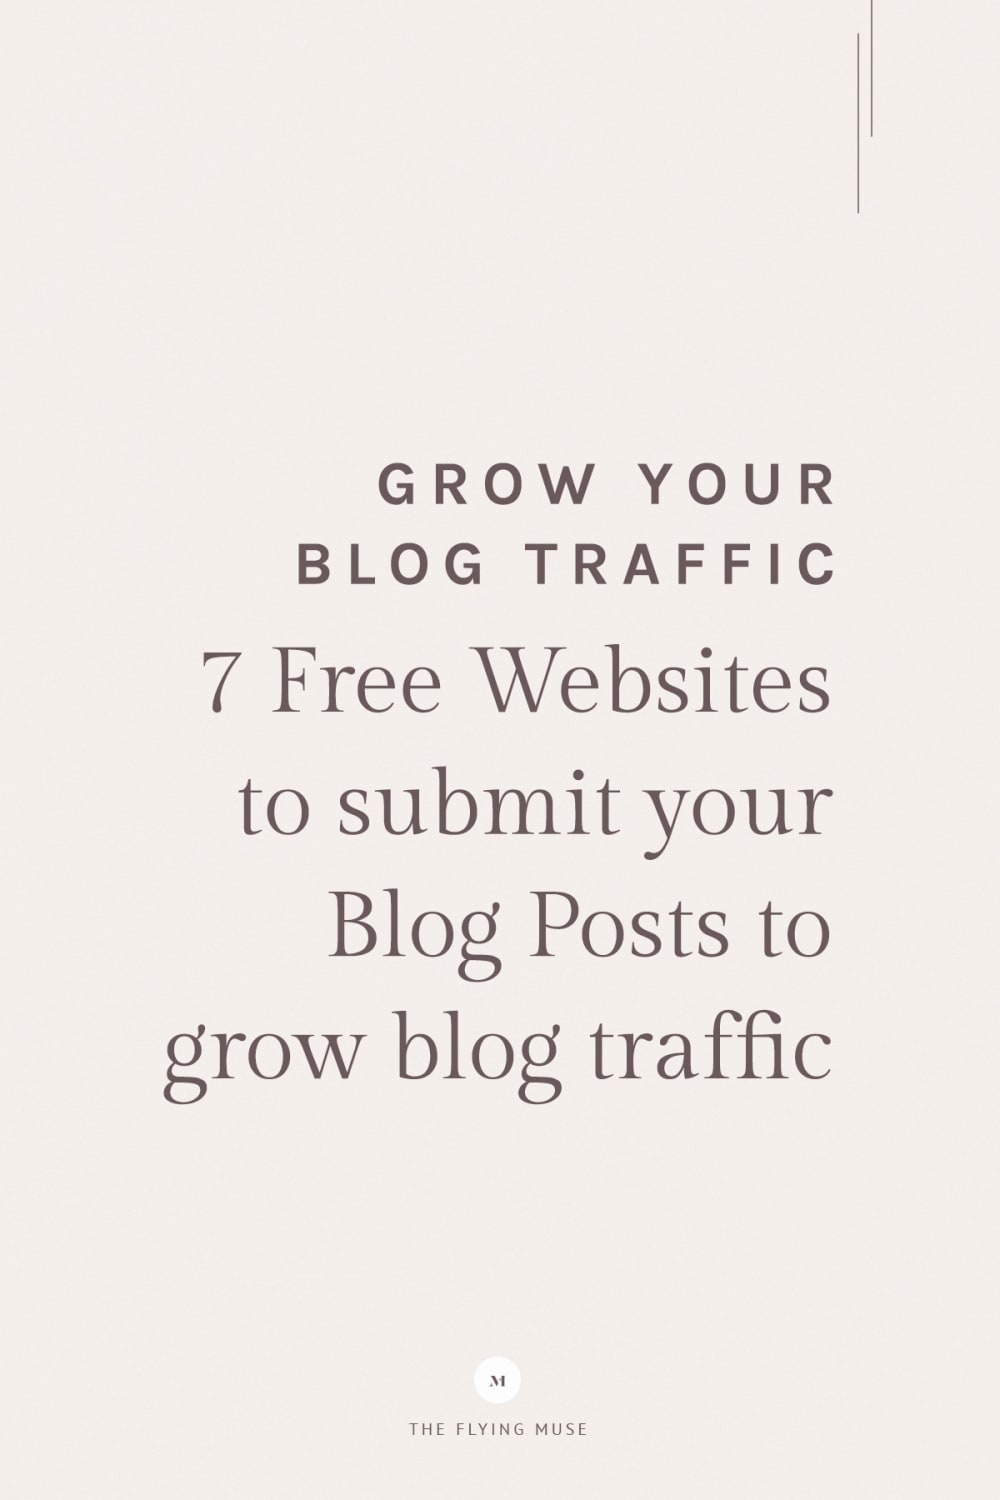 Grow your Blog Traffic: 7 Free Websites to Submit Your Blog Posts to